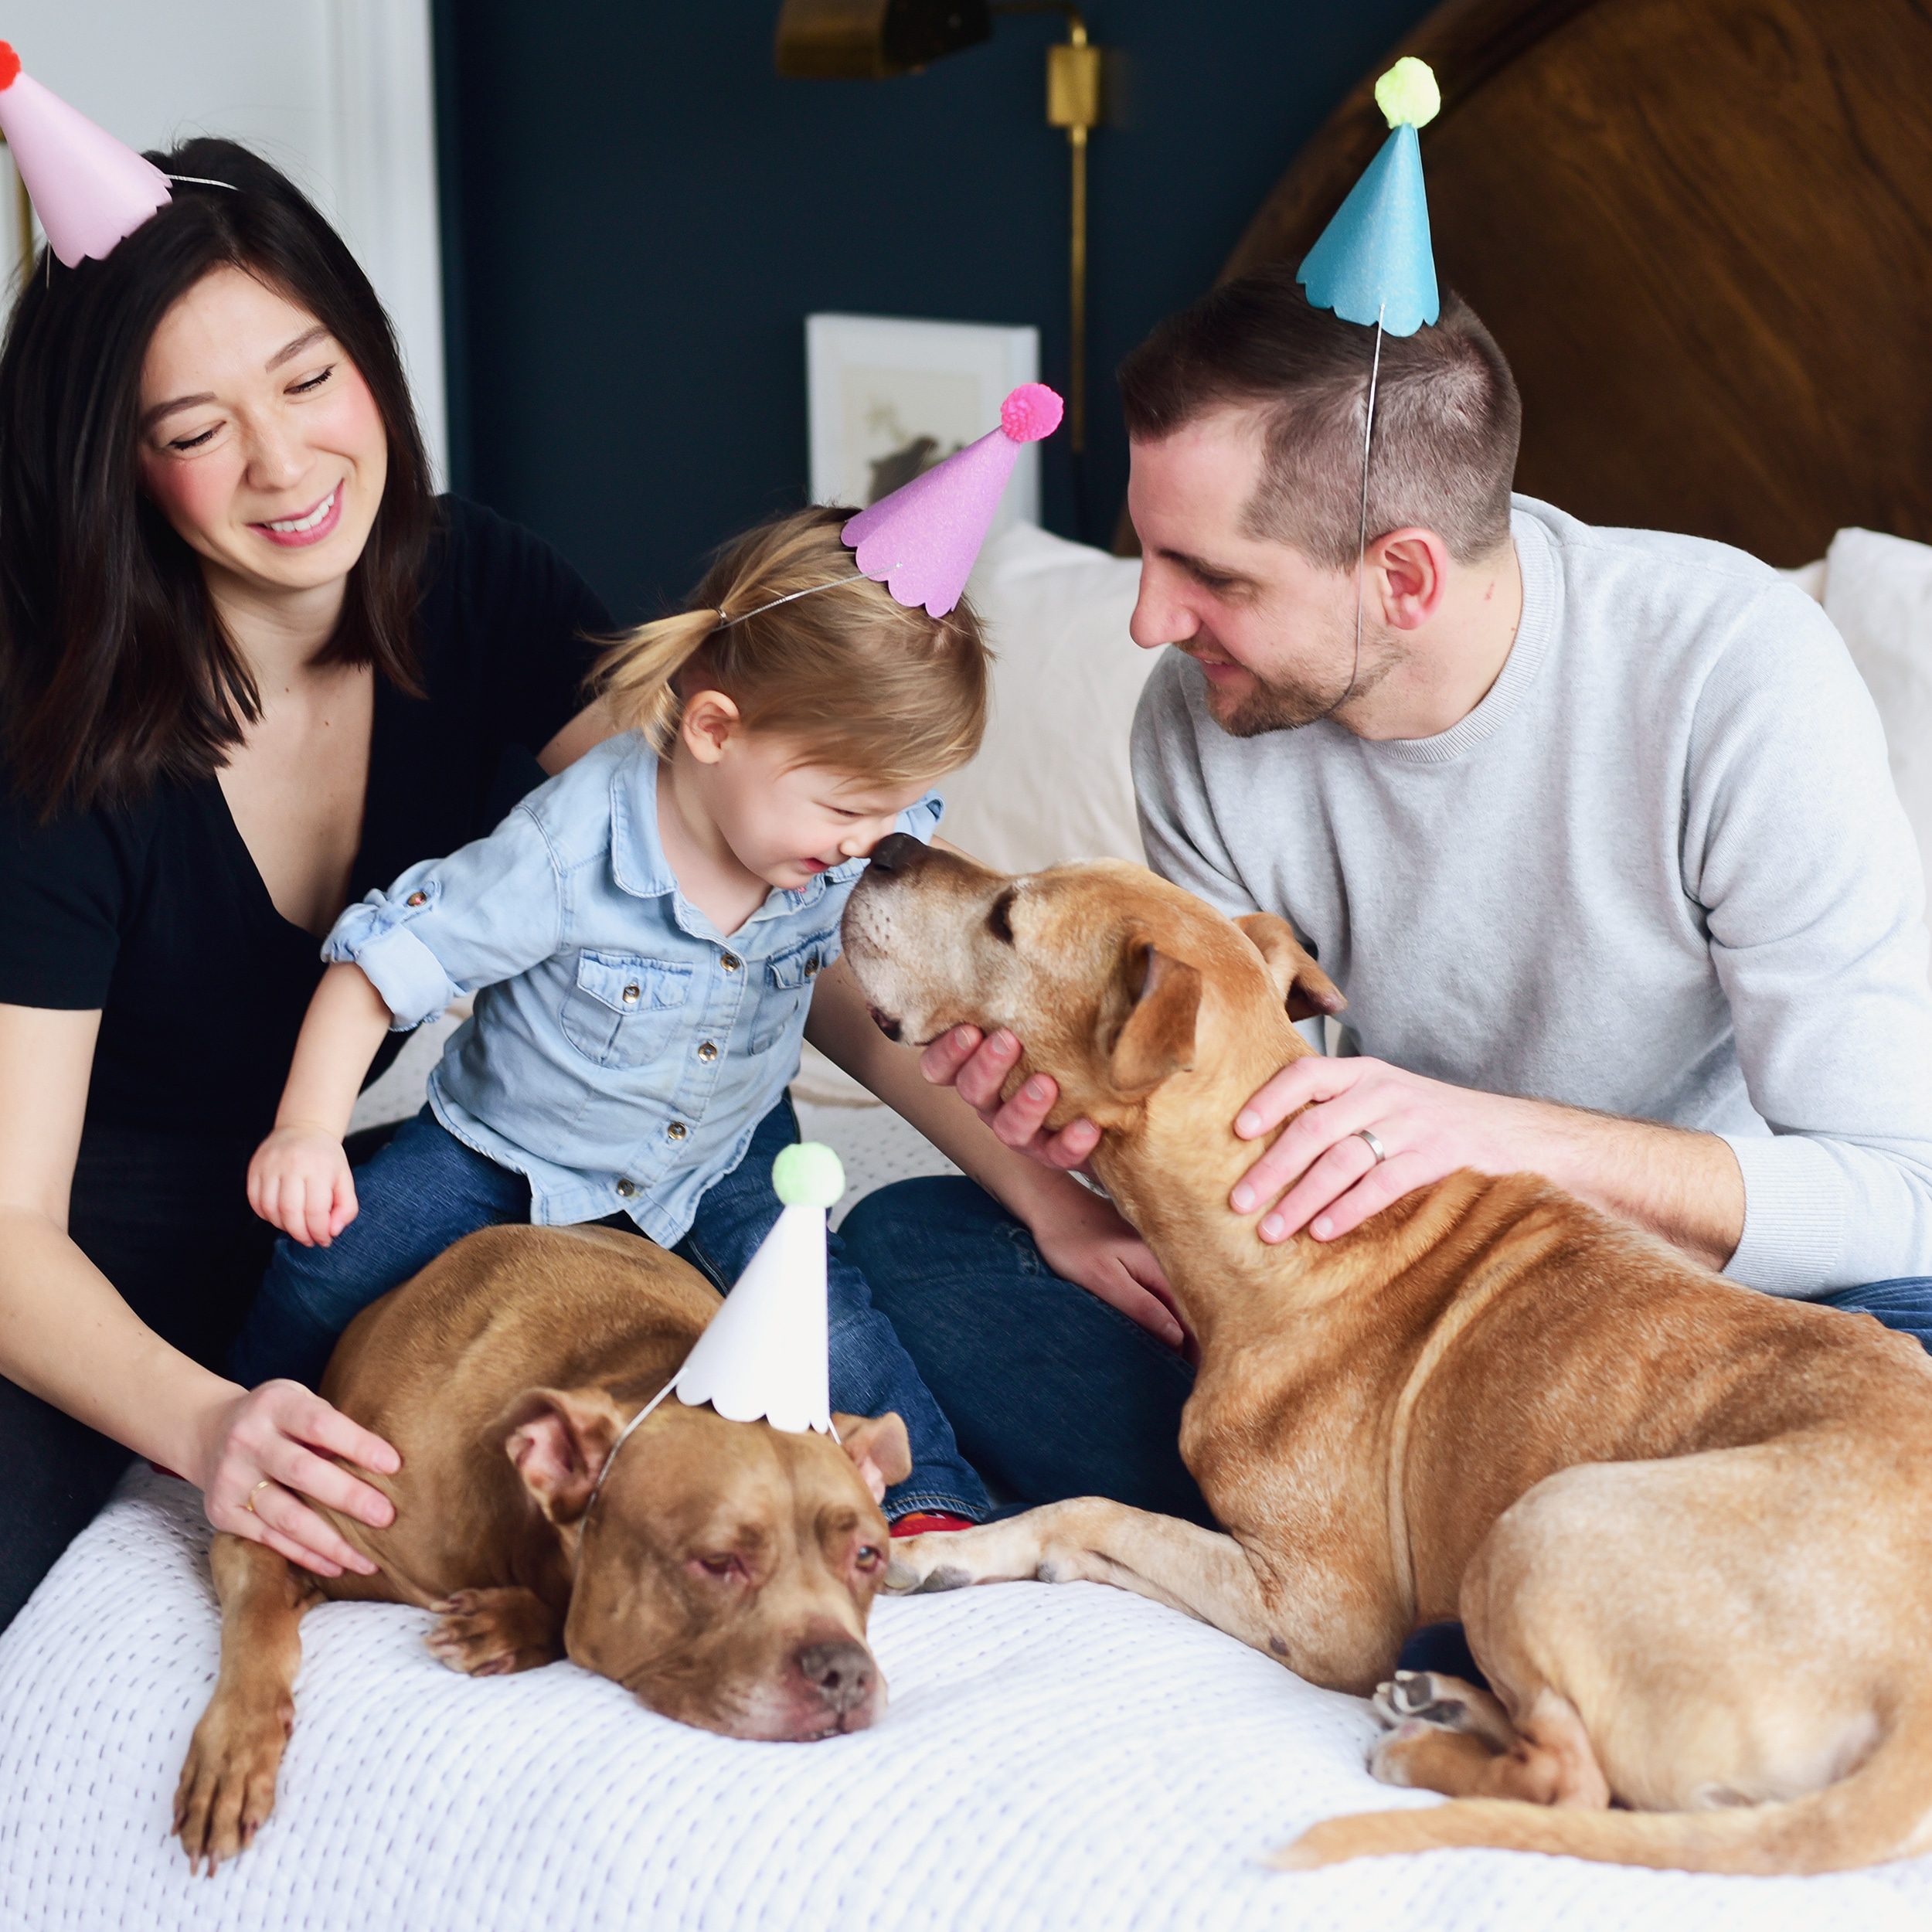 A family photo with party hats and our two dogs | via Yellow Brick Home